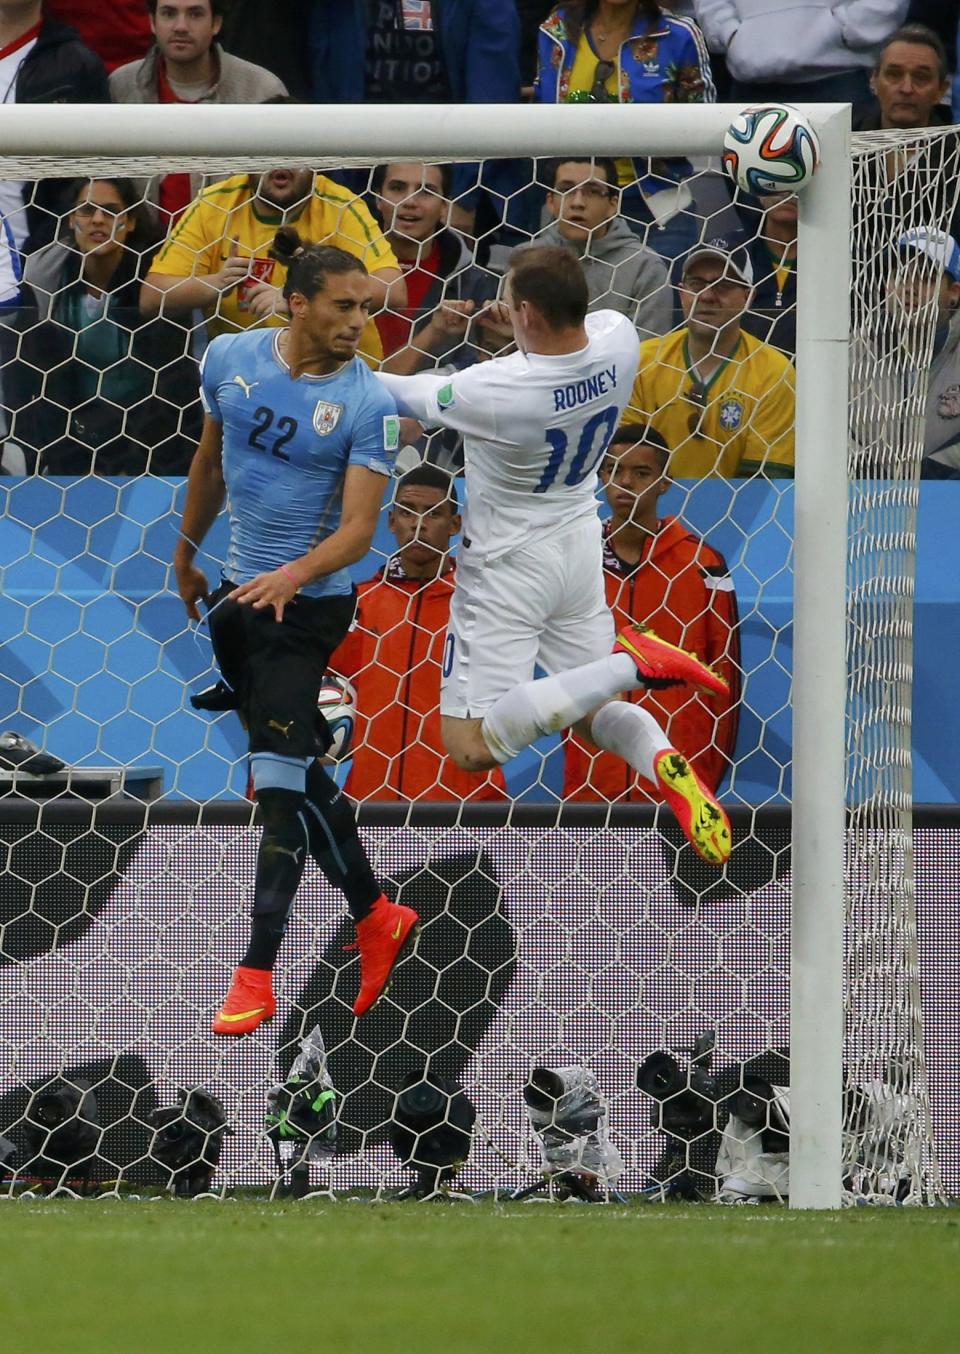 England's Rooney heads the ball into the crossbar during the 2014 World Cup Group D soccer match between Uruguay and England in Sao Paulo